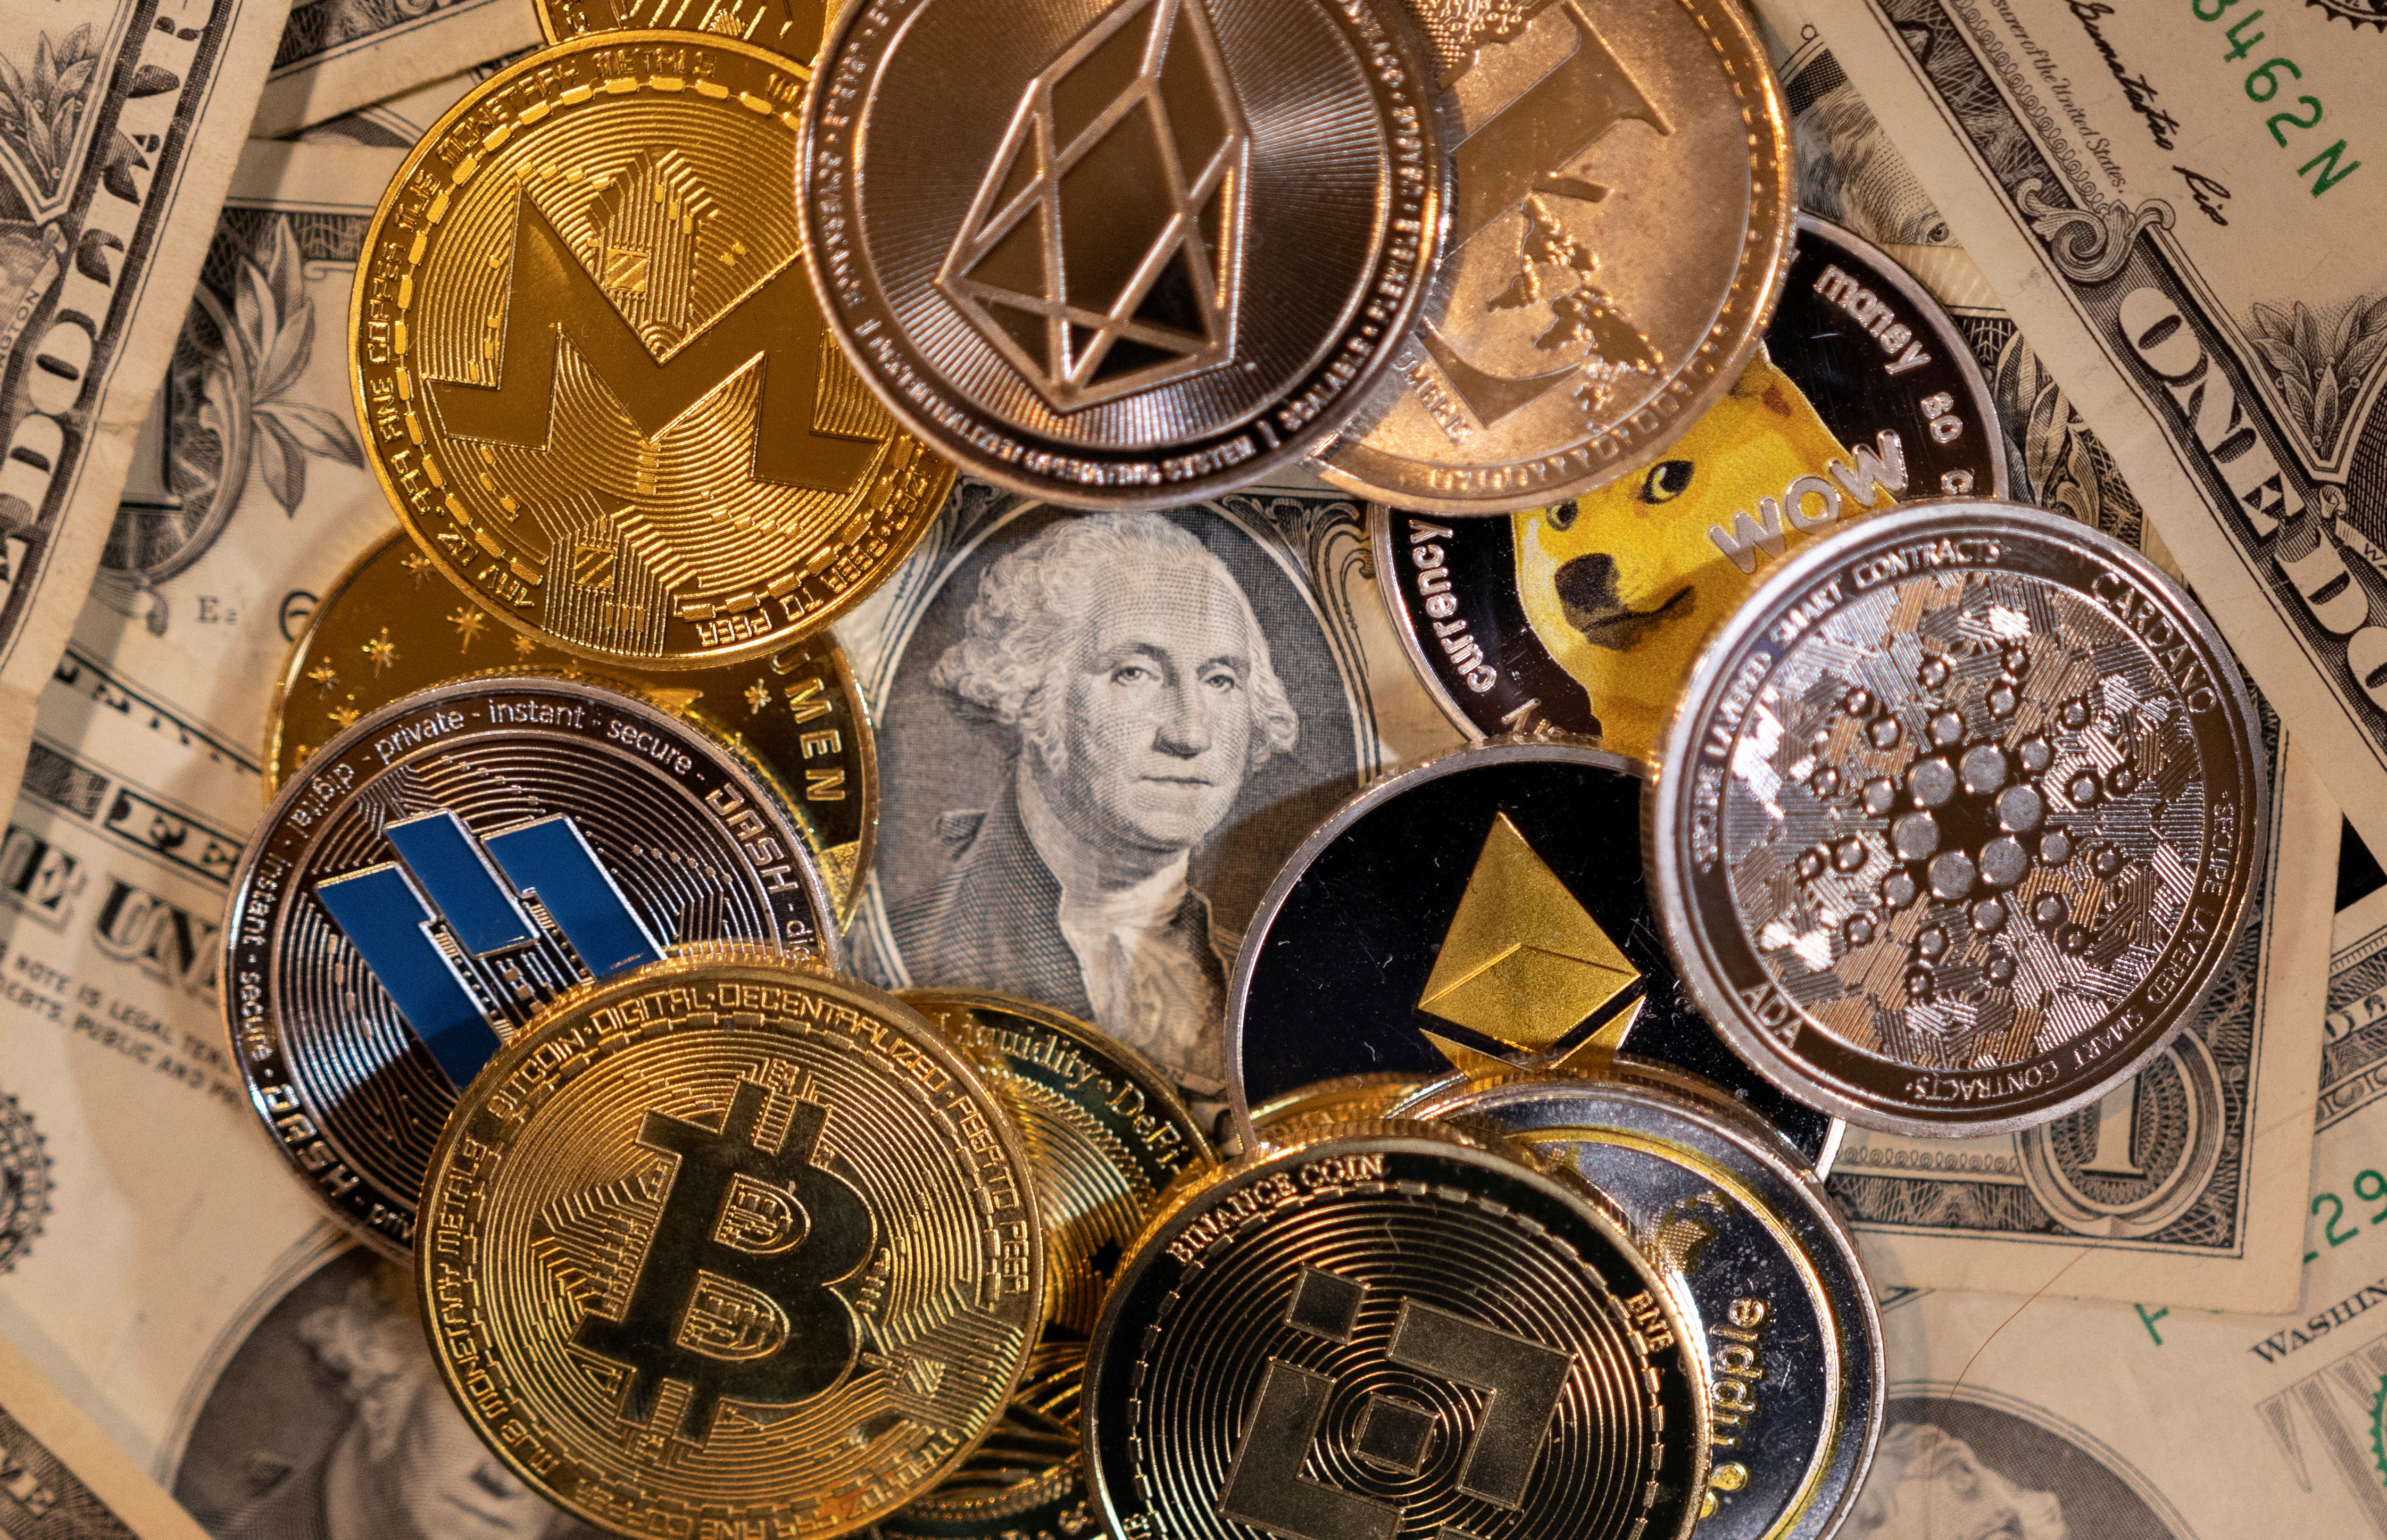 Ilustration shows representations of virtual cryptocurrencies on U.S. Dollar banknotes